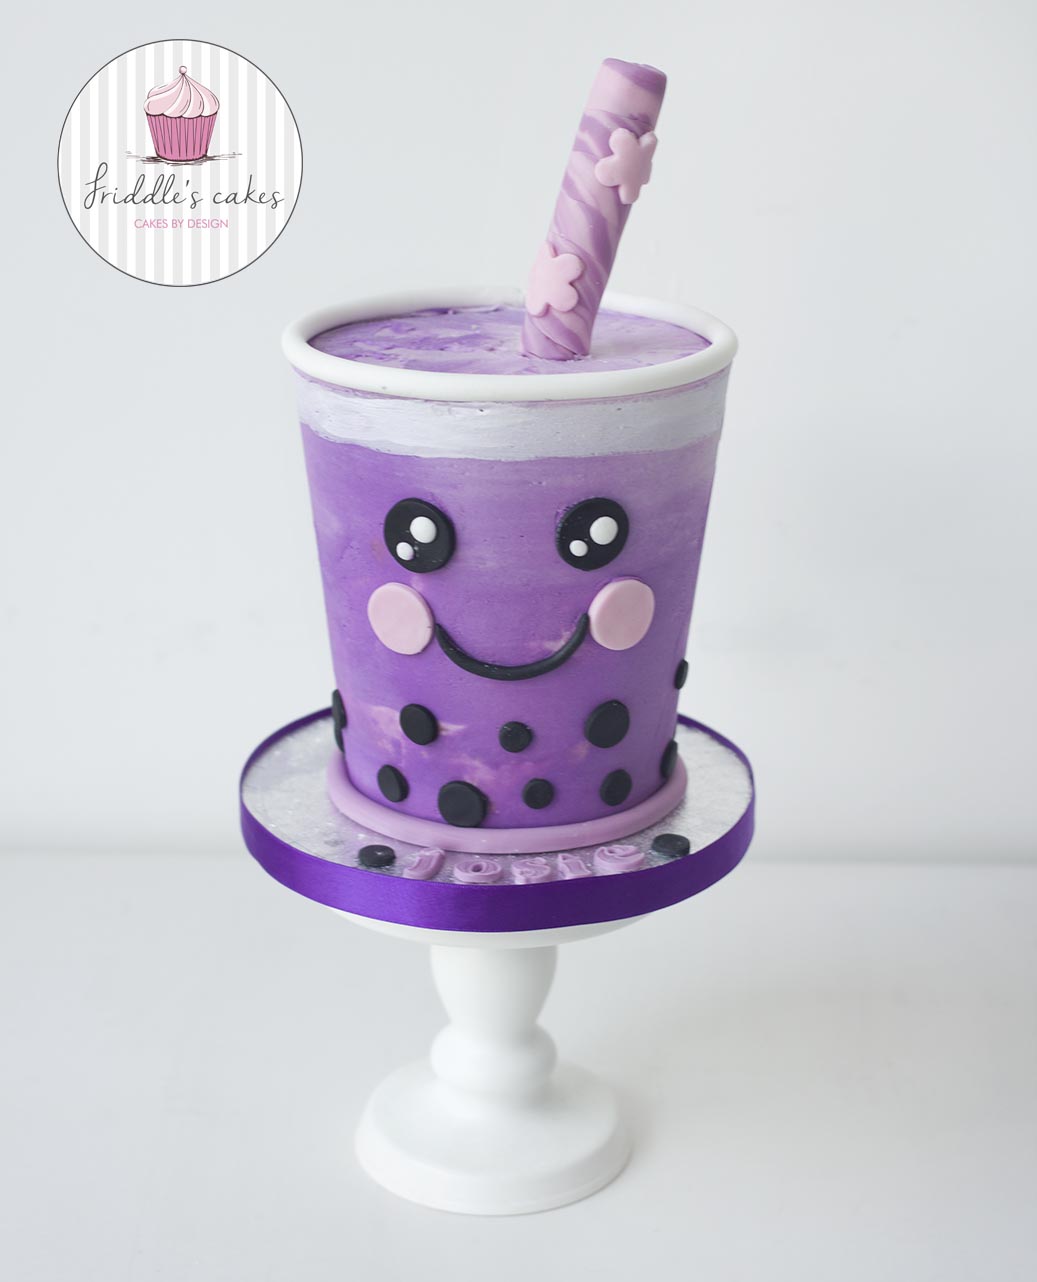 10 Mad Hatter Cake Ideas From Alice in Wonderland · The Inspiration Edit